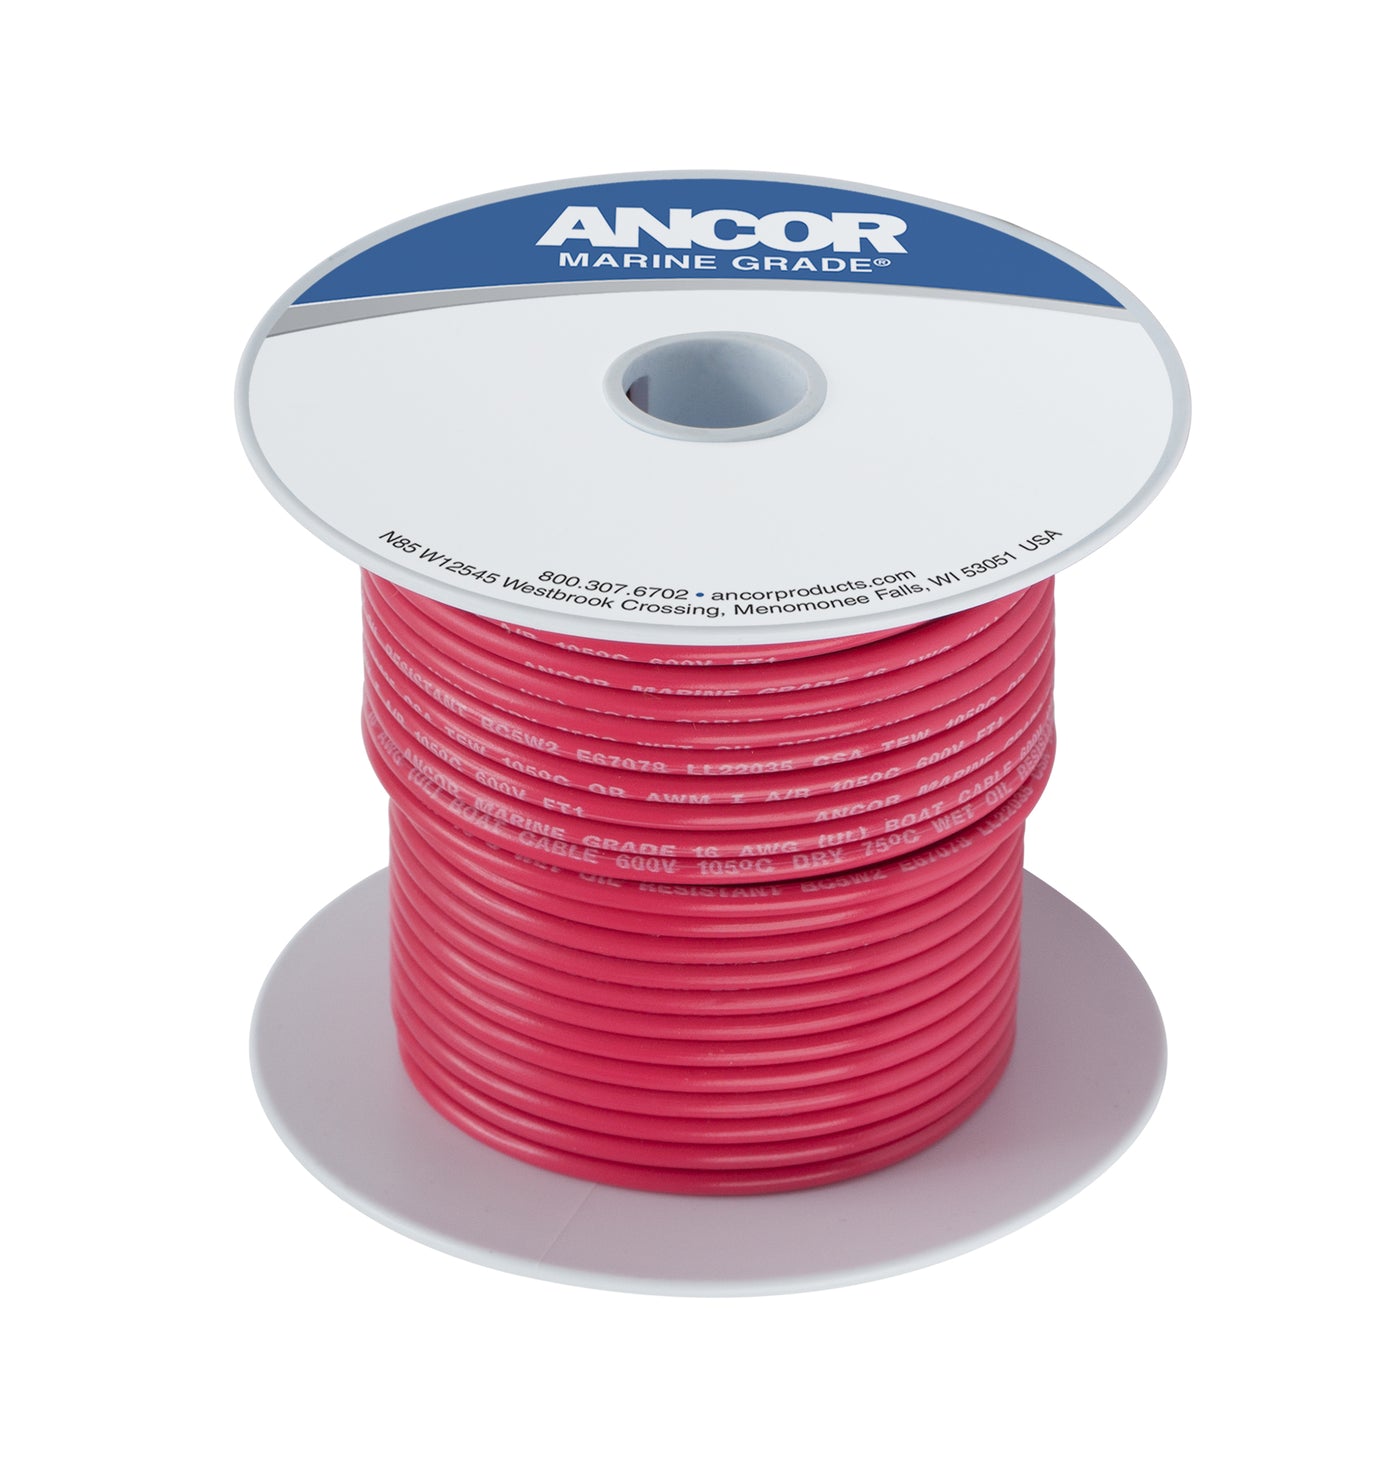 Ancor 112505 Tinned Copper Wire, 6 AWG (13mm²), Red - 50ft